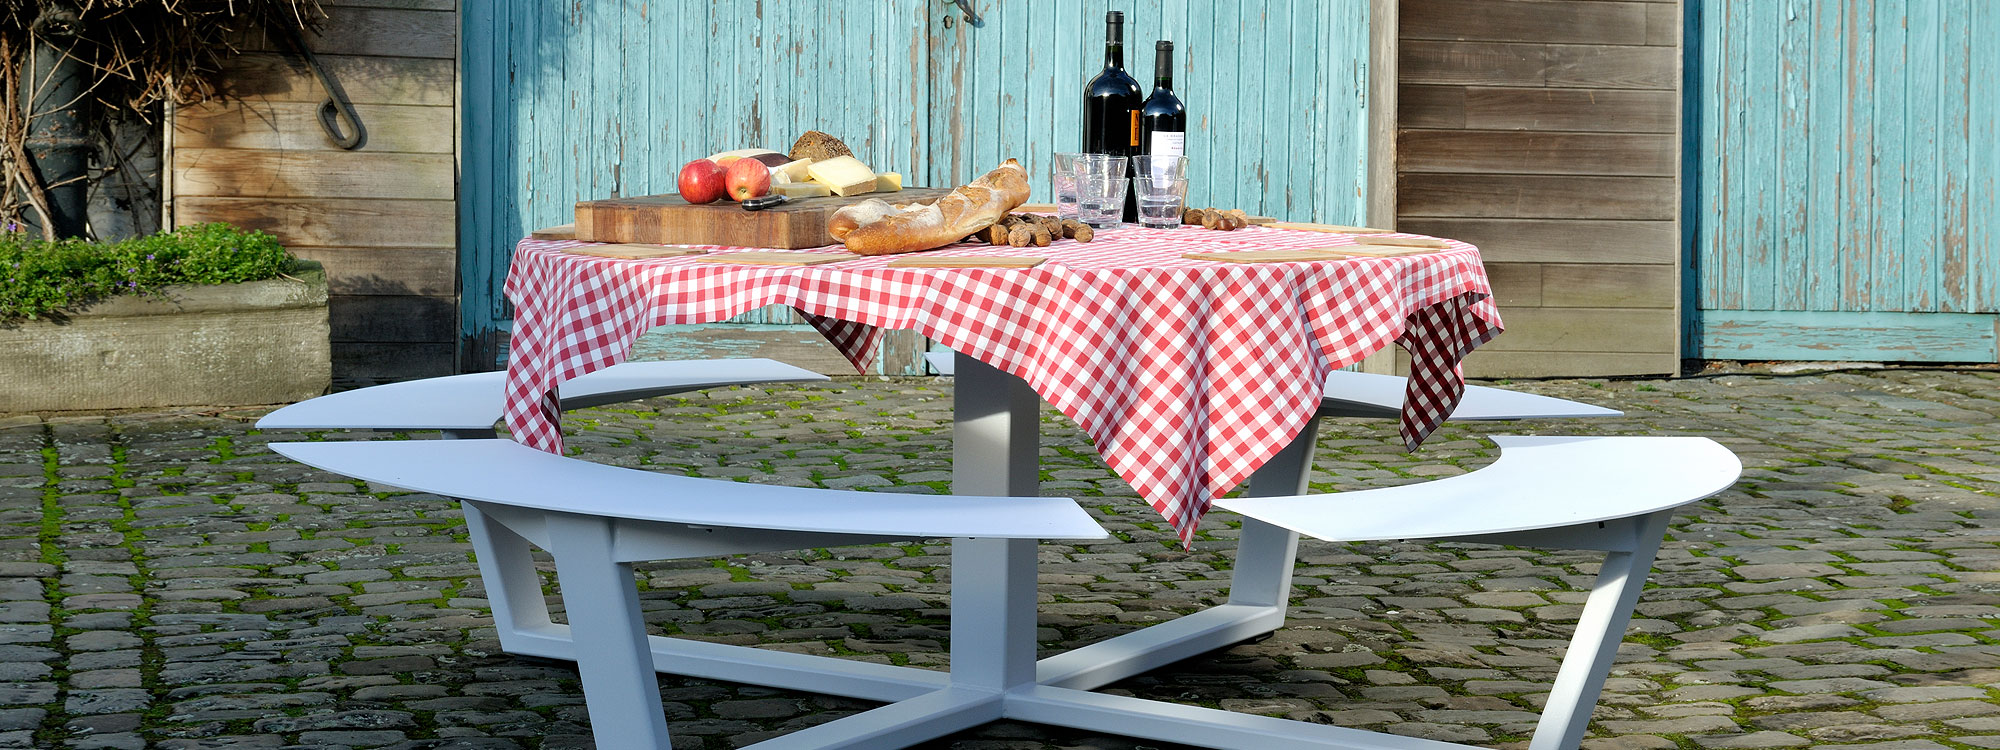 Image of Cassecroute's La Grande Ronde round picnic table in white, with table top set with red & white gingham table cloth and wine and cheese